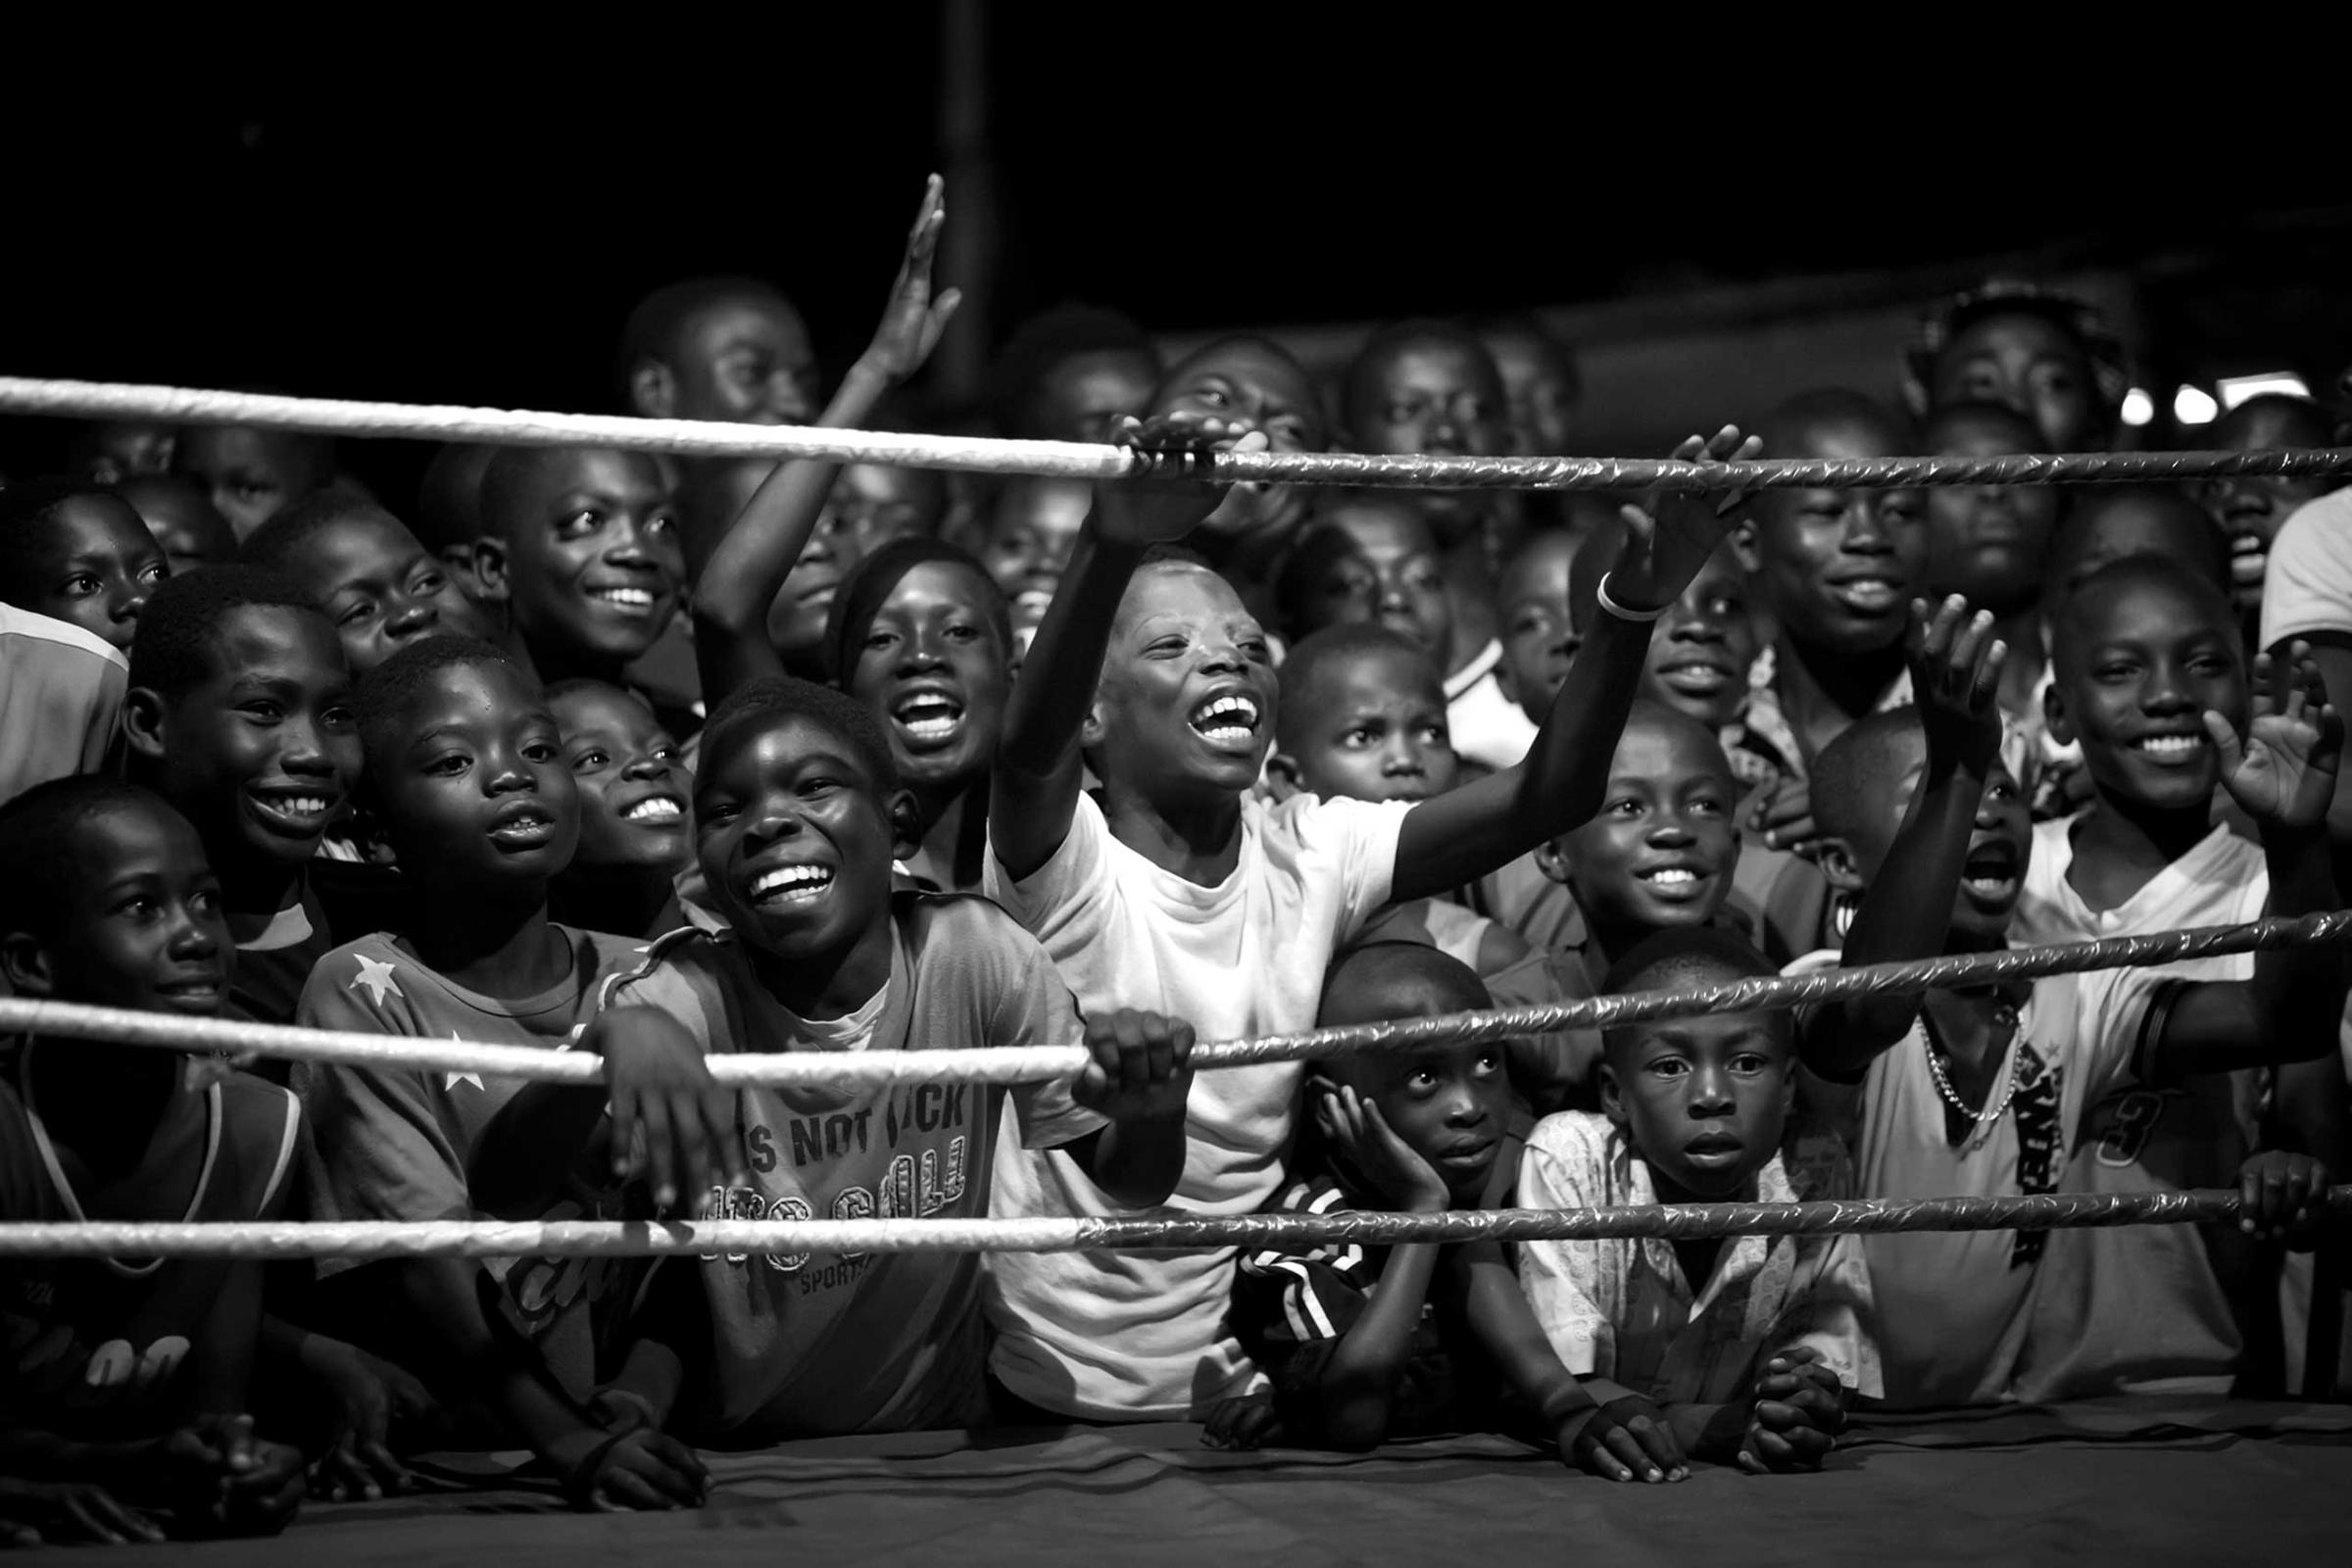 Young boys cheer at a boxing match in Bukom, a small neighborhood of Accra in Ghana, which has produced all of the country's world champions.